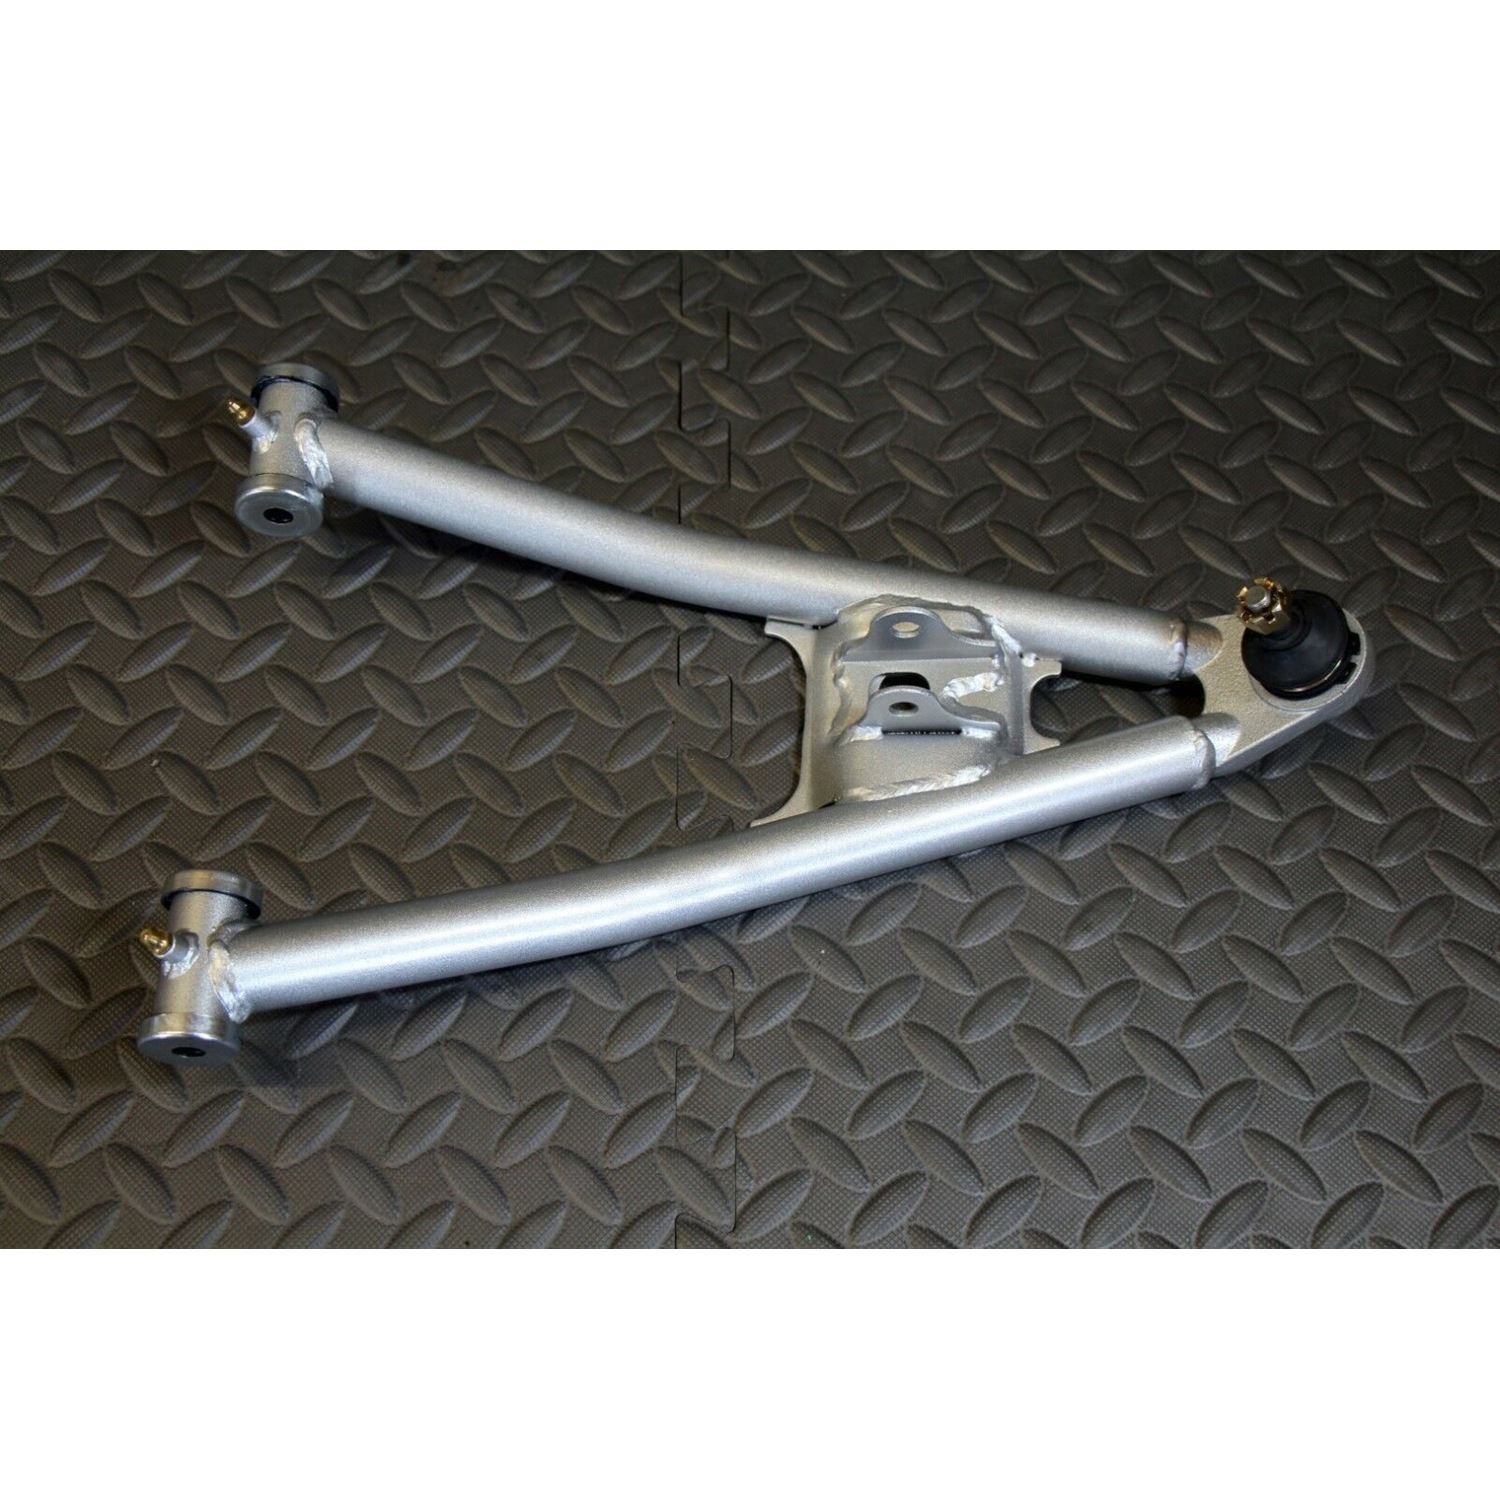 NEW Yamaha YFZ450 lower a-arm top BRAKE LEVER SIDE